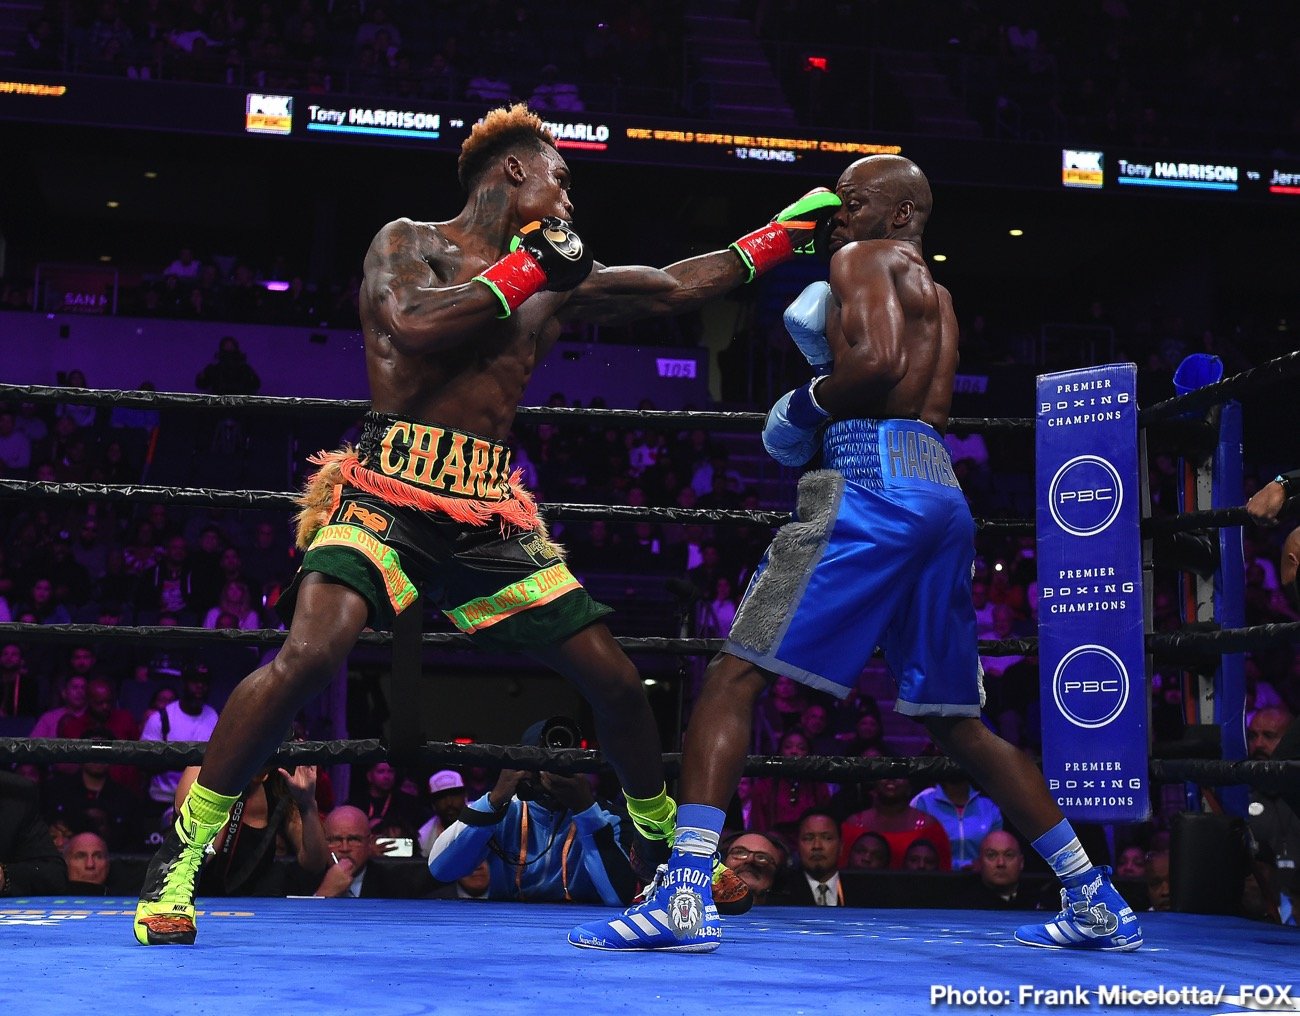 Image: Jermell Charlo: "I'm off to BIGGER and better things" after beating Tony Harrison